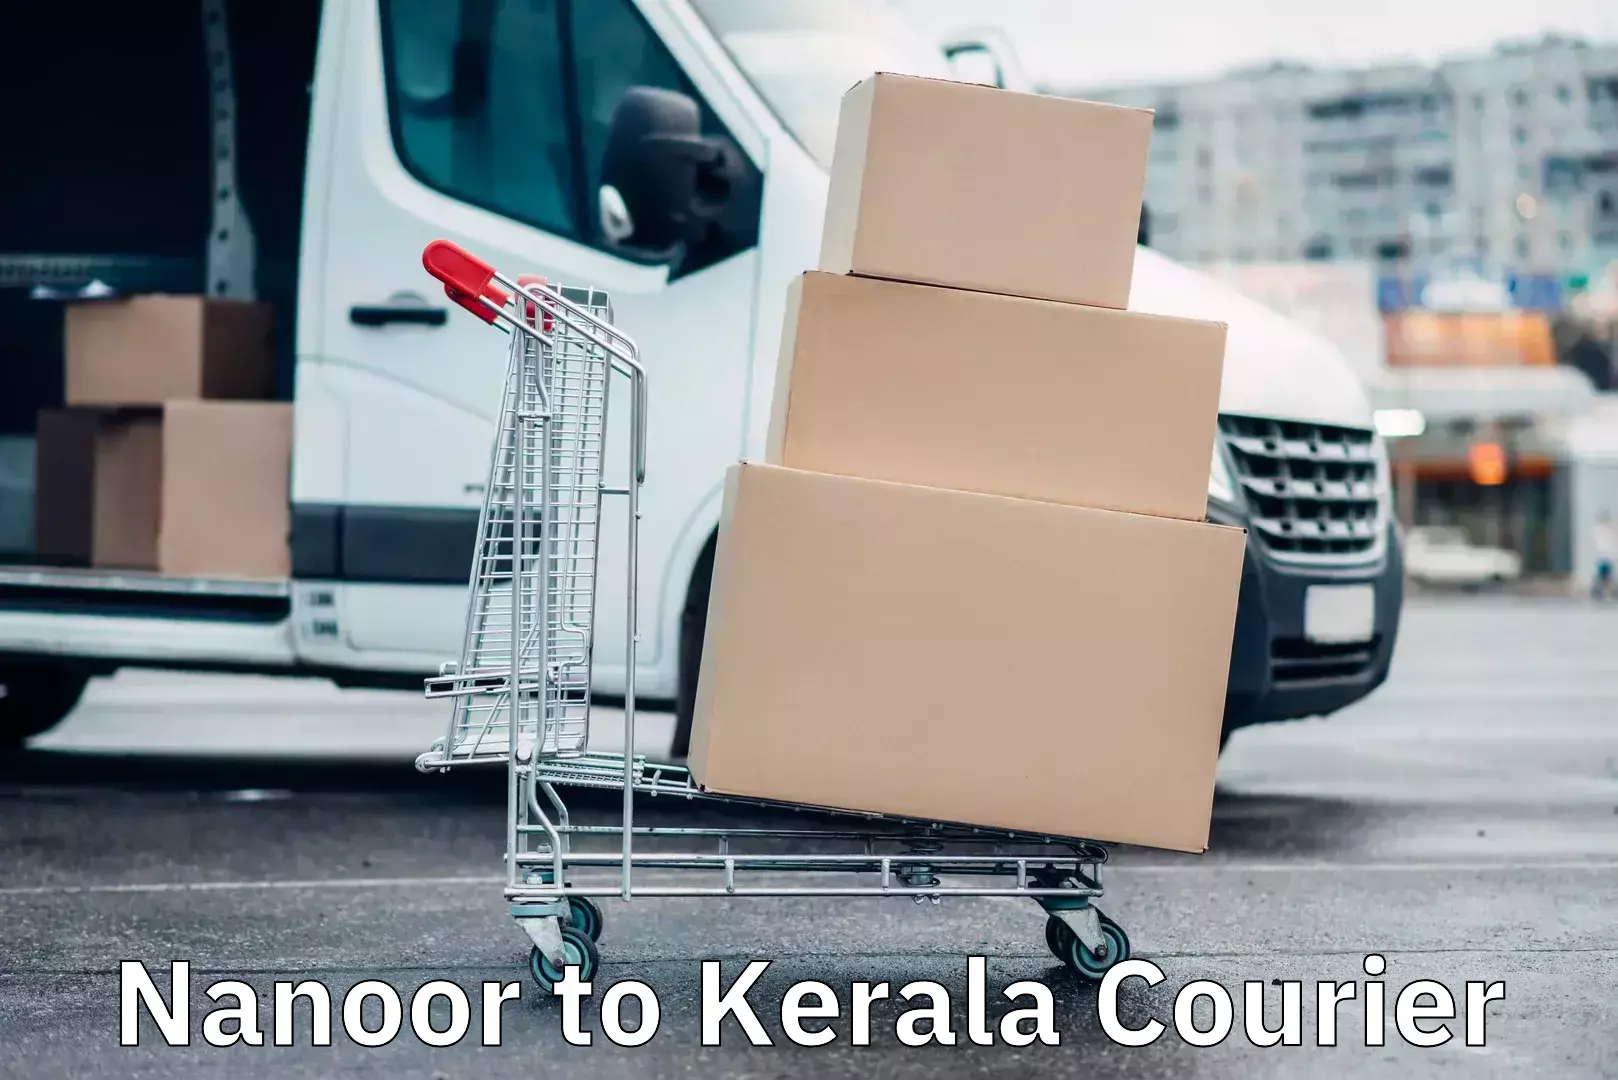 On-call courier service Nanoor to Cochin Port Kochi